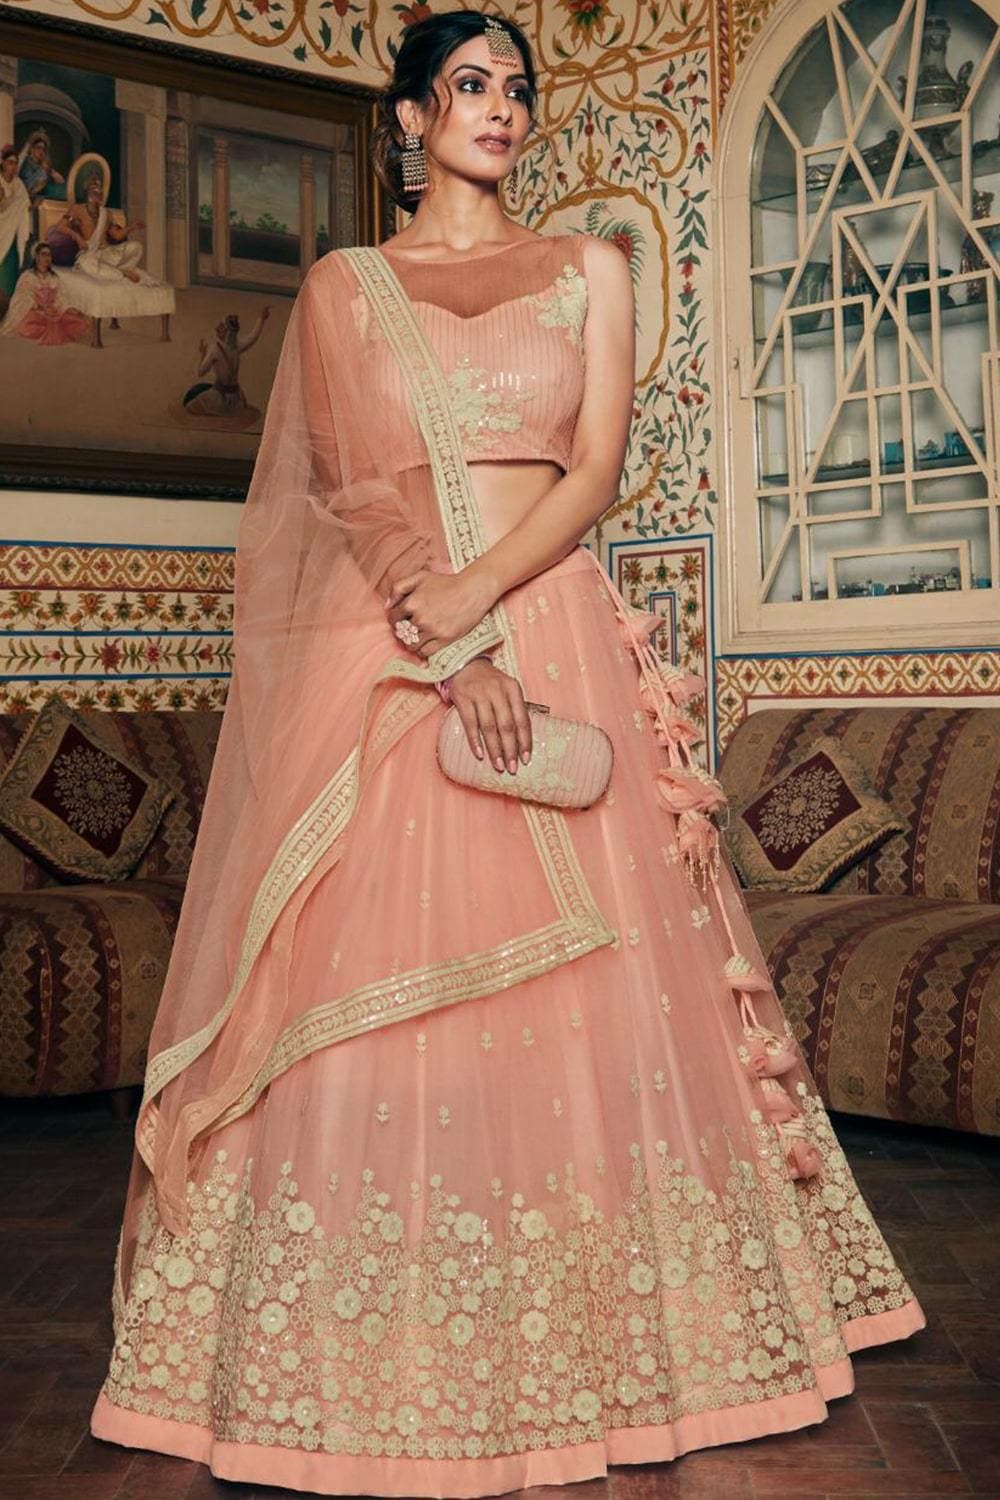 Pastel Is Pride - Embrace These Pretty Lehengas and Forget the Rules |  KALKI Fashion Blog | Young bride, Bridal looks, Brides and bridesmaids